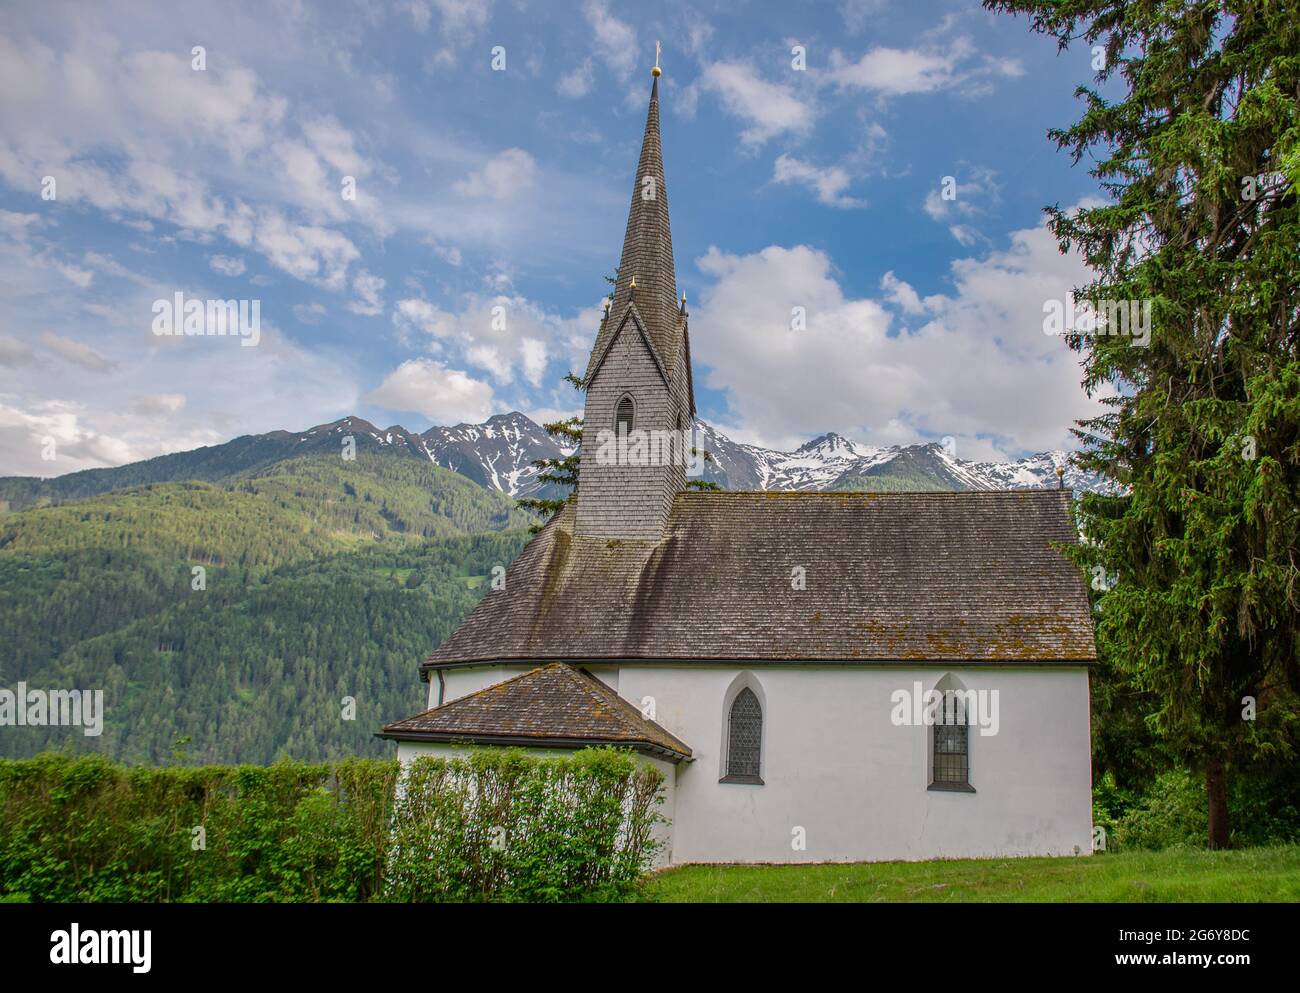 TELFS, AUSTRIA - Jun 12, 2021: The St. Moritzen Chapell was built in the middle of the 17th century and is located the edge of the forest near Telfs/A Stock Photo